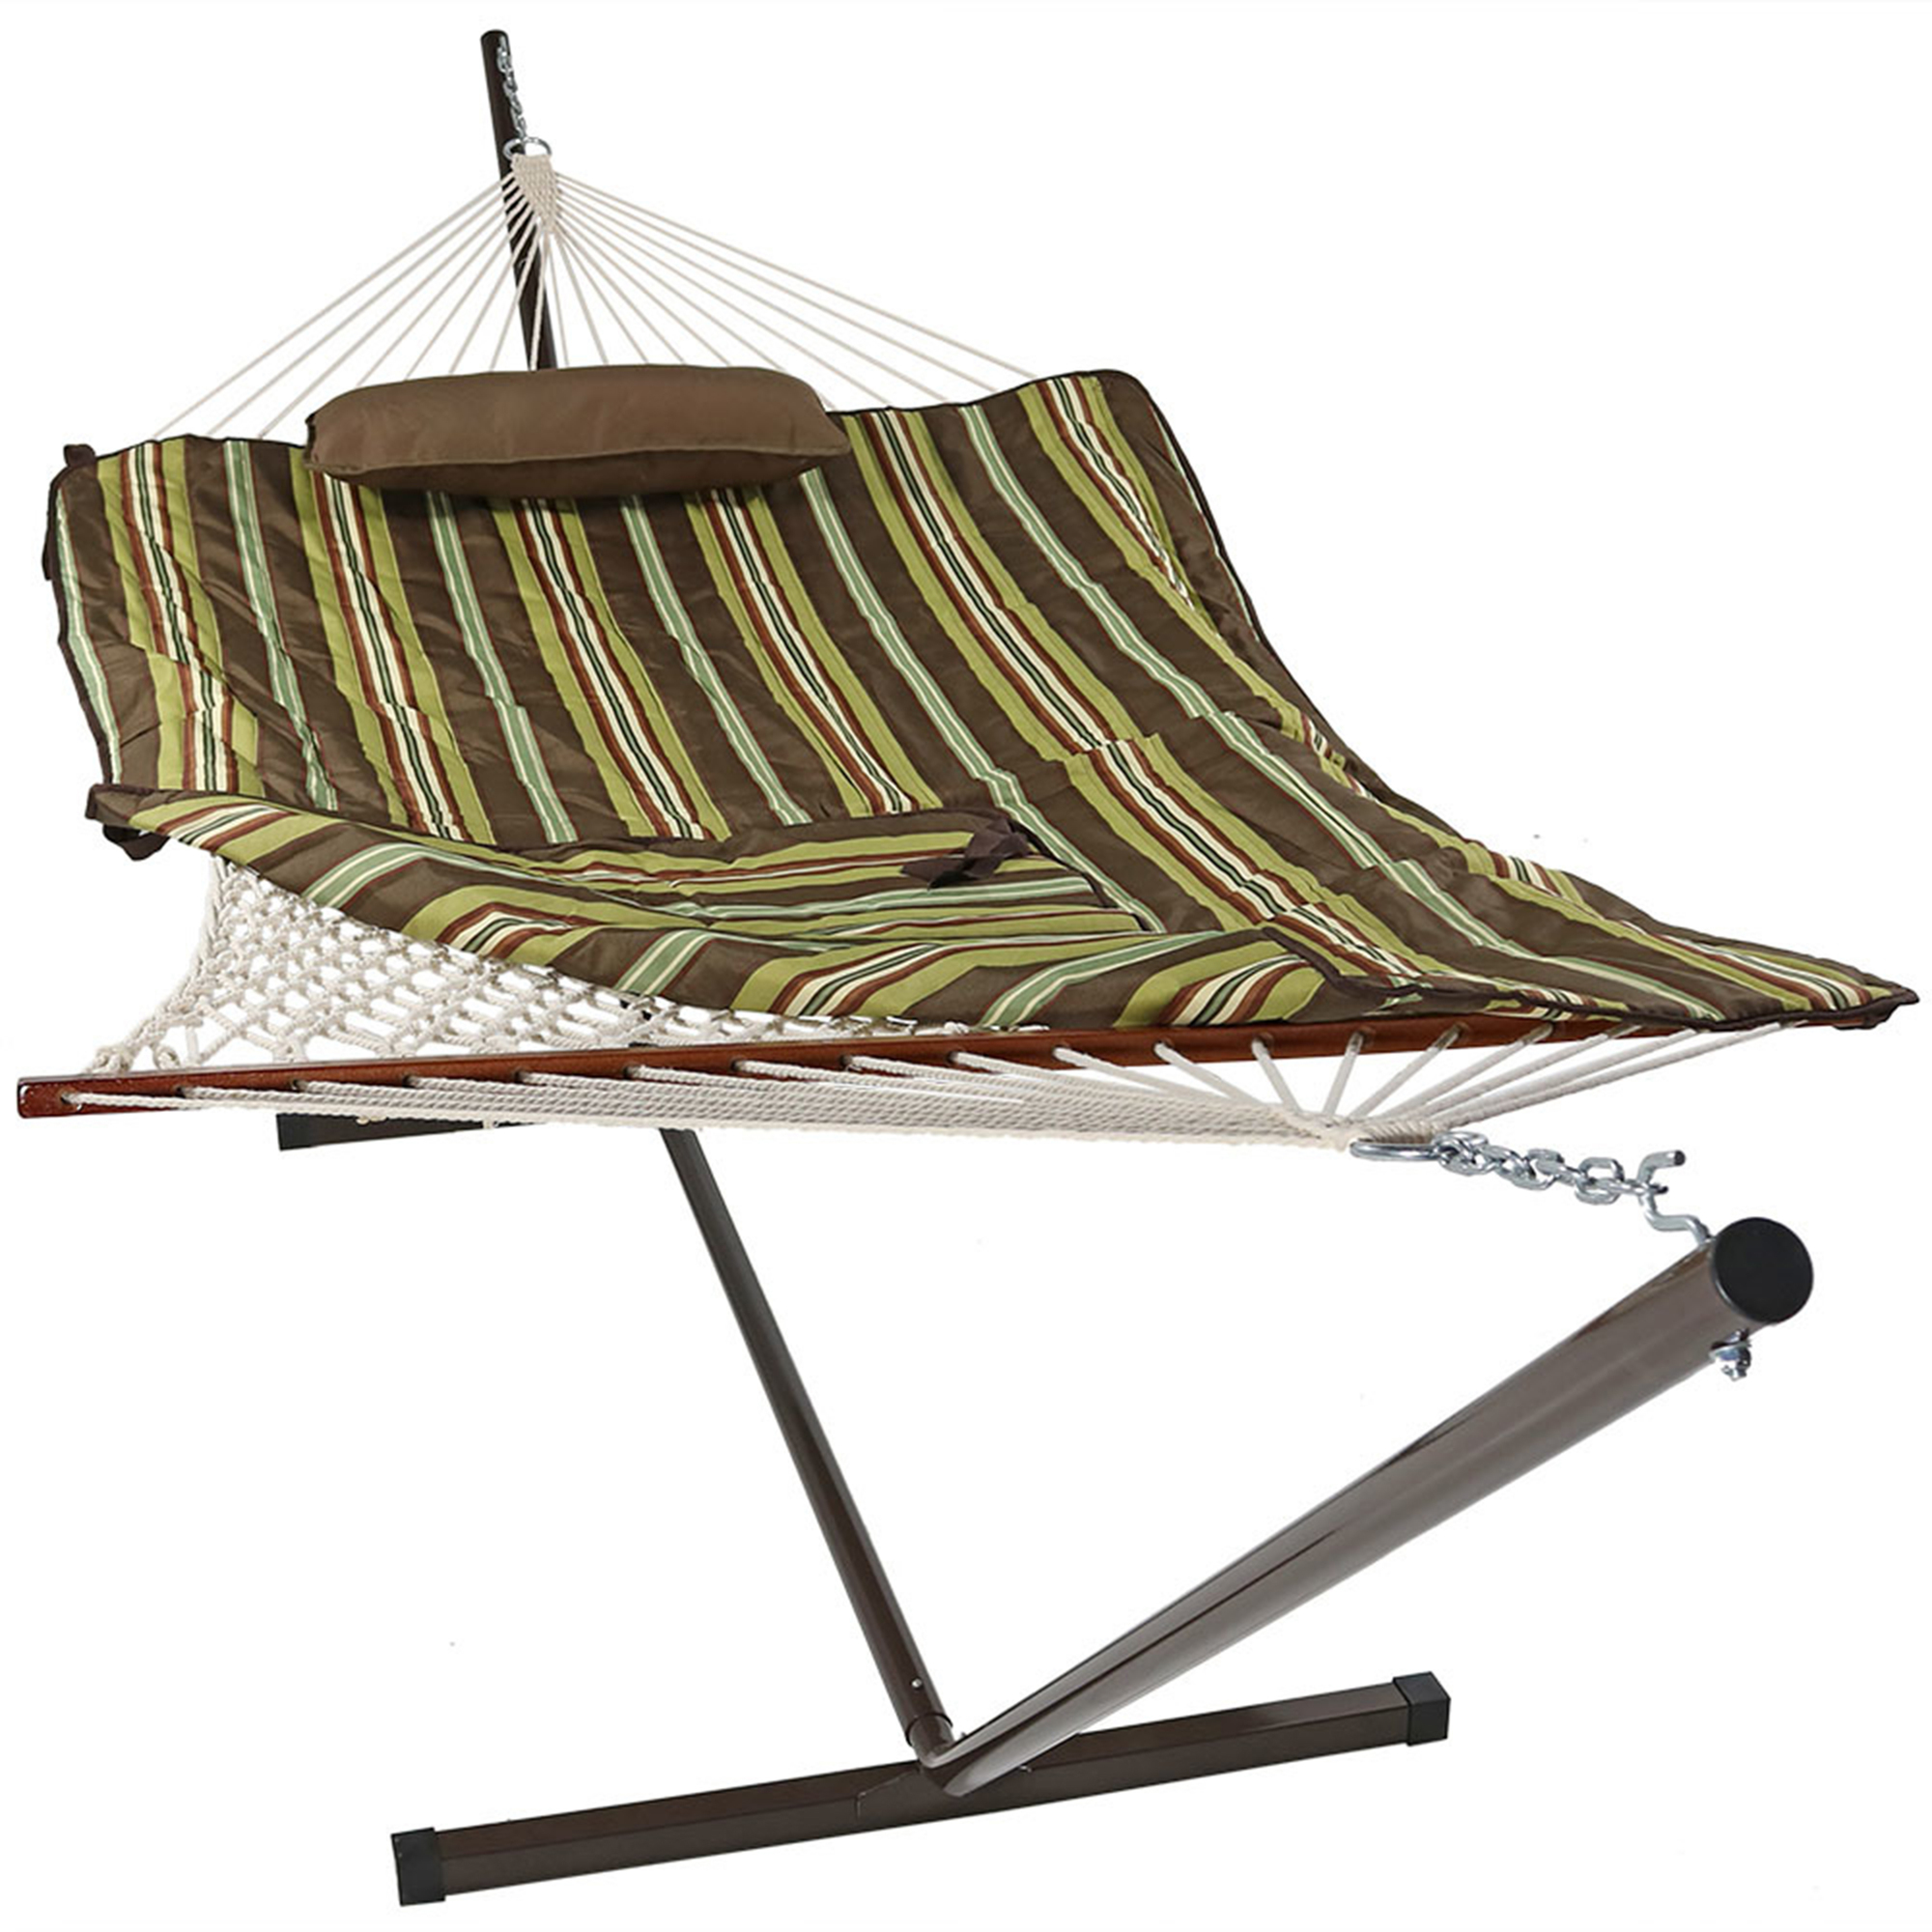 Sunnydaze Decor, Rope Hammock with 12ft. Stand - Desert Stripe, Color  Brown, Capacity 275 lb, Material Woven Cord, Model# DL-DSRH-Combo